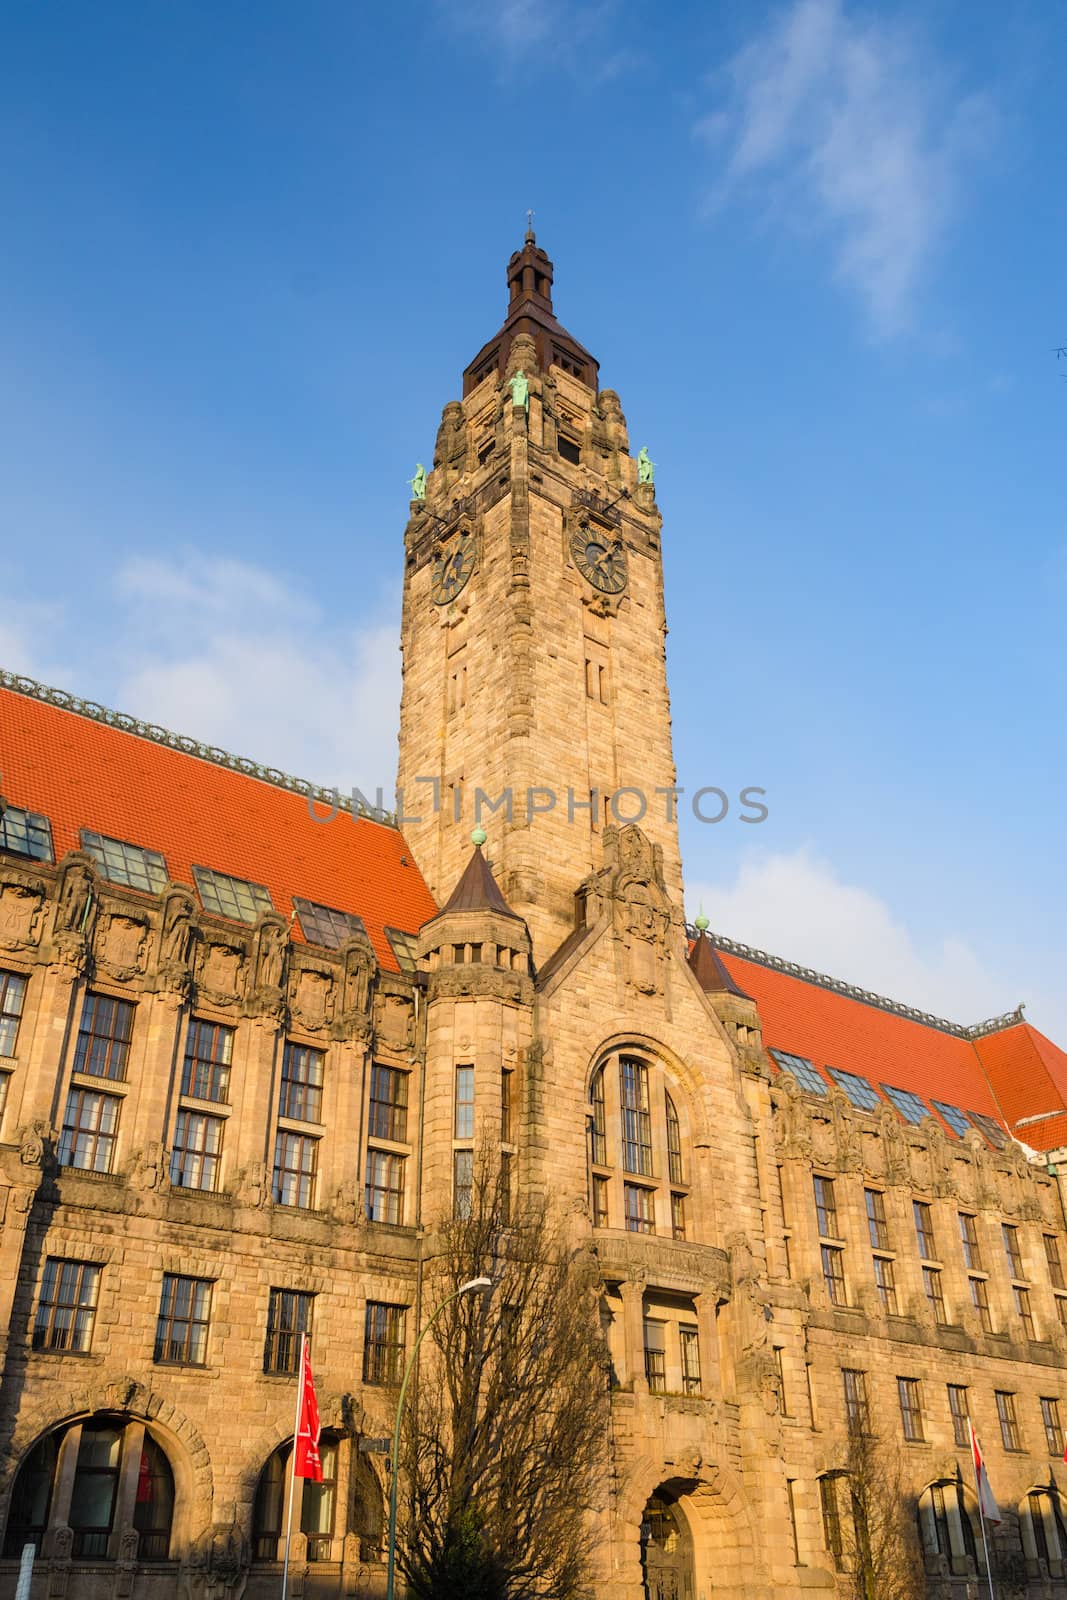 Charlottenburg Town Hall - is an administrative building situated in the Charlottenburg-Wilmersdorf borough of Berlin in Germany